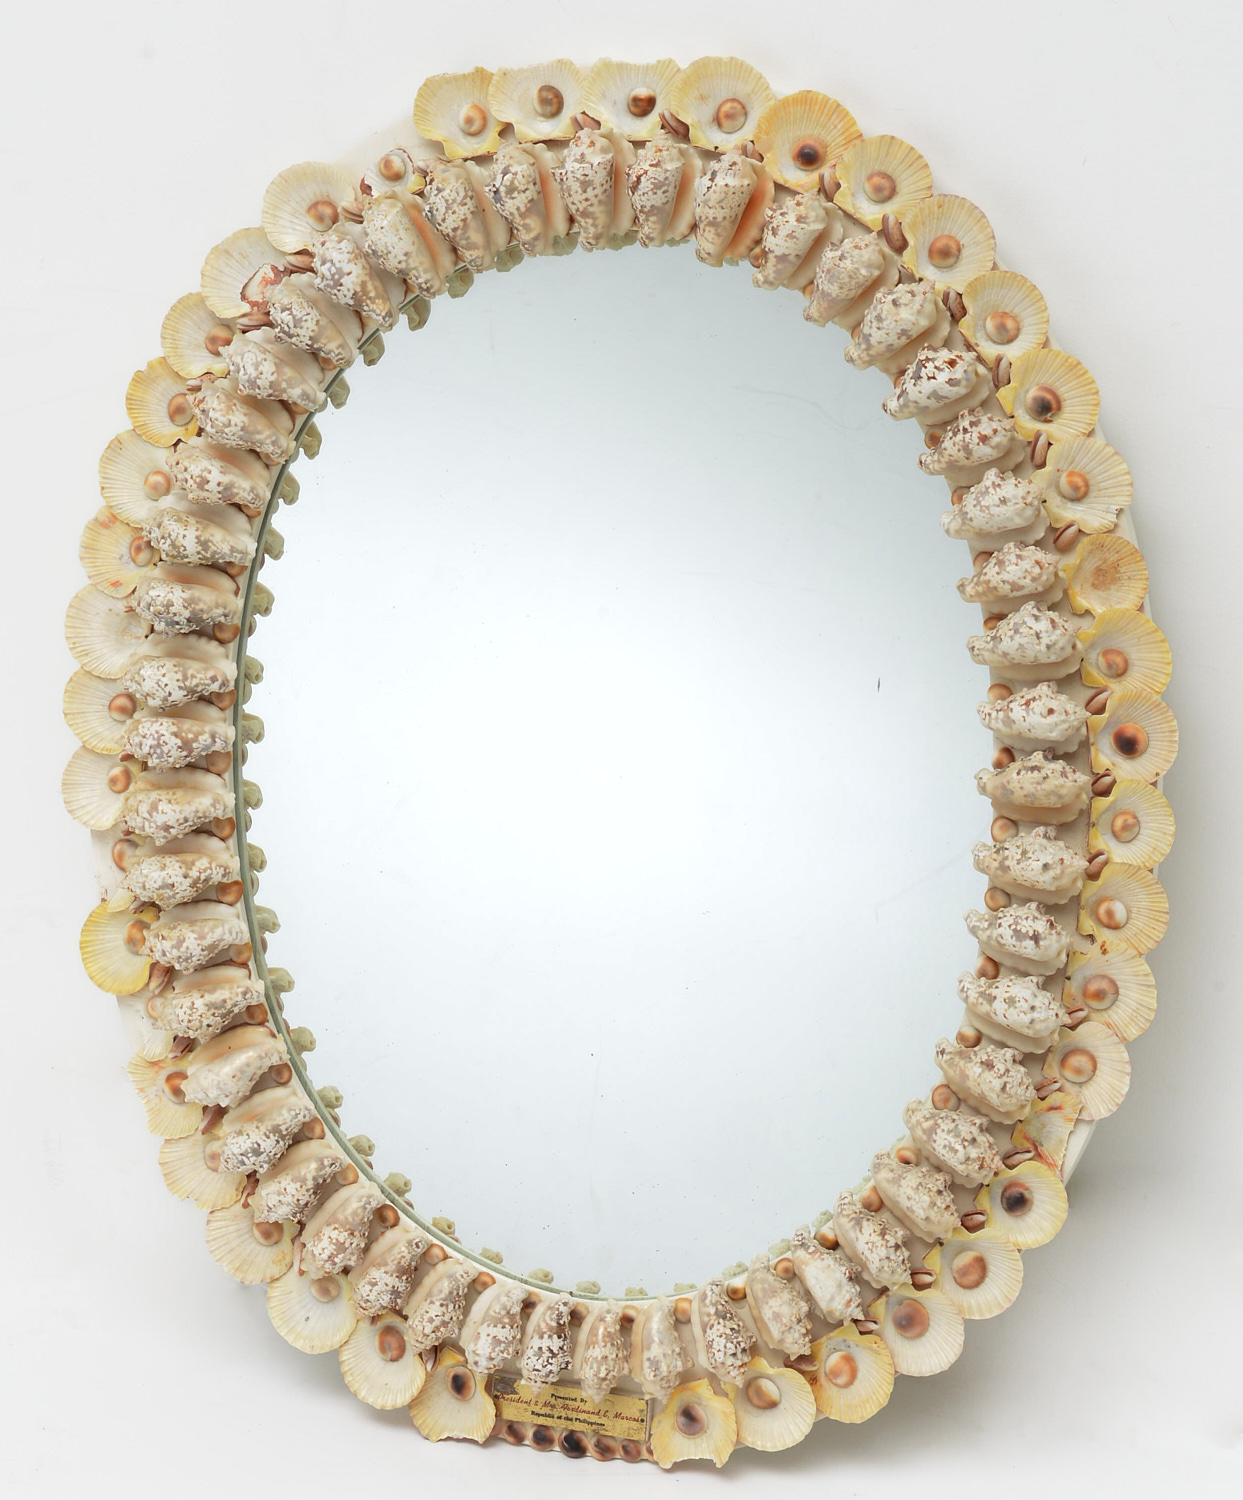 SHELL ENCRUSTED MIRROR GIFT OF 362025